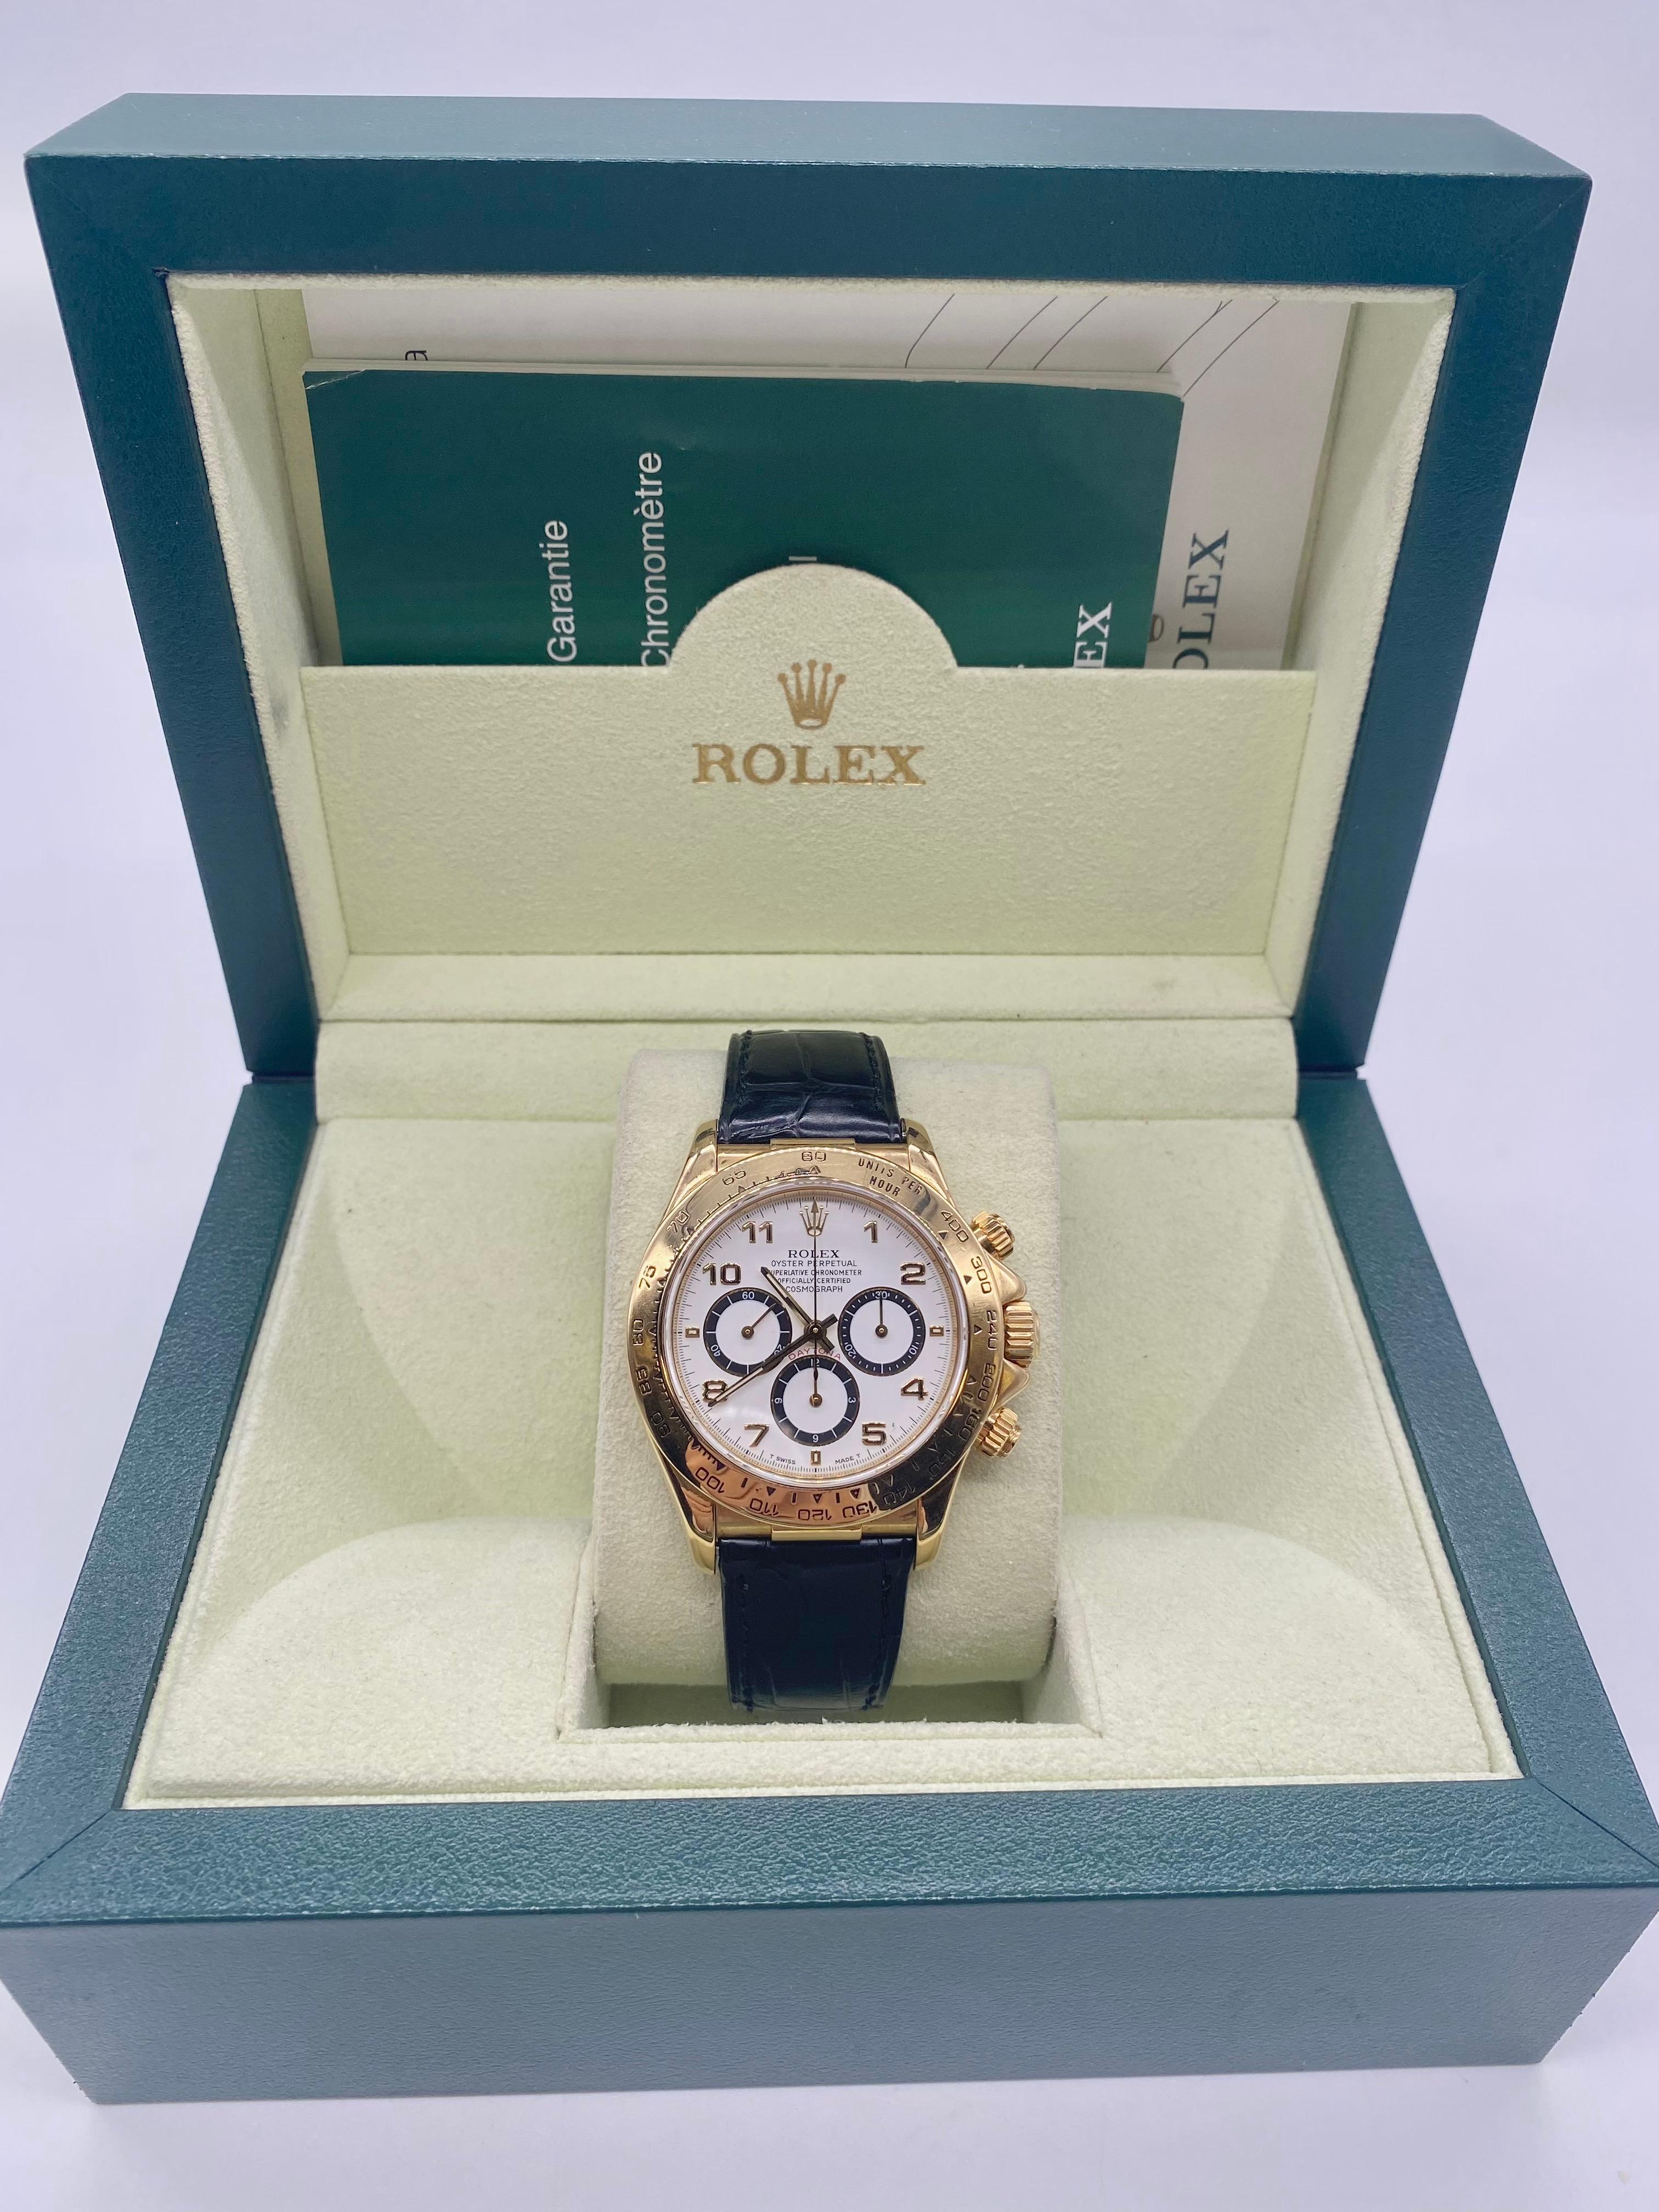 Rolex Daytona in 18 Carat yellow gold surrounded by a crocodile skin strap. It comes with an authentic box. Quality pre-owned Rolex watch.

The Certified Pre-Owned Rolex Daytona Sport watch is crafted in 18k yellow gold on a crocodile strap 18K